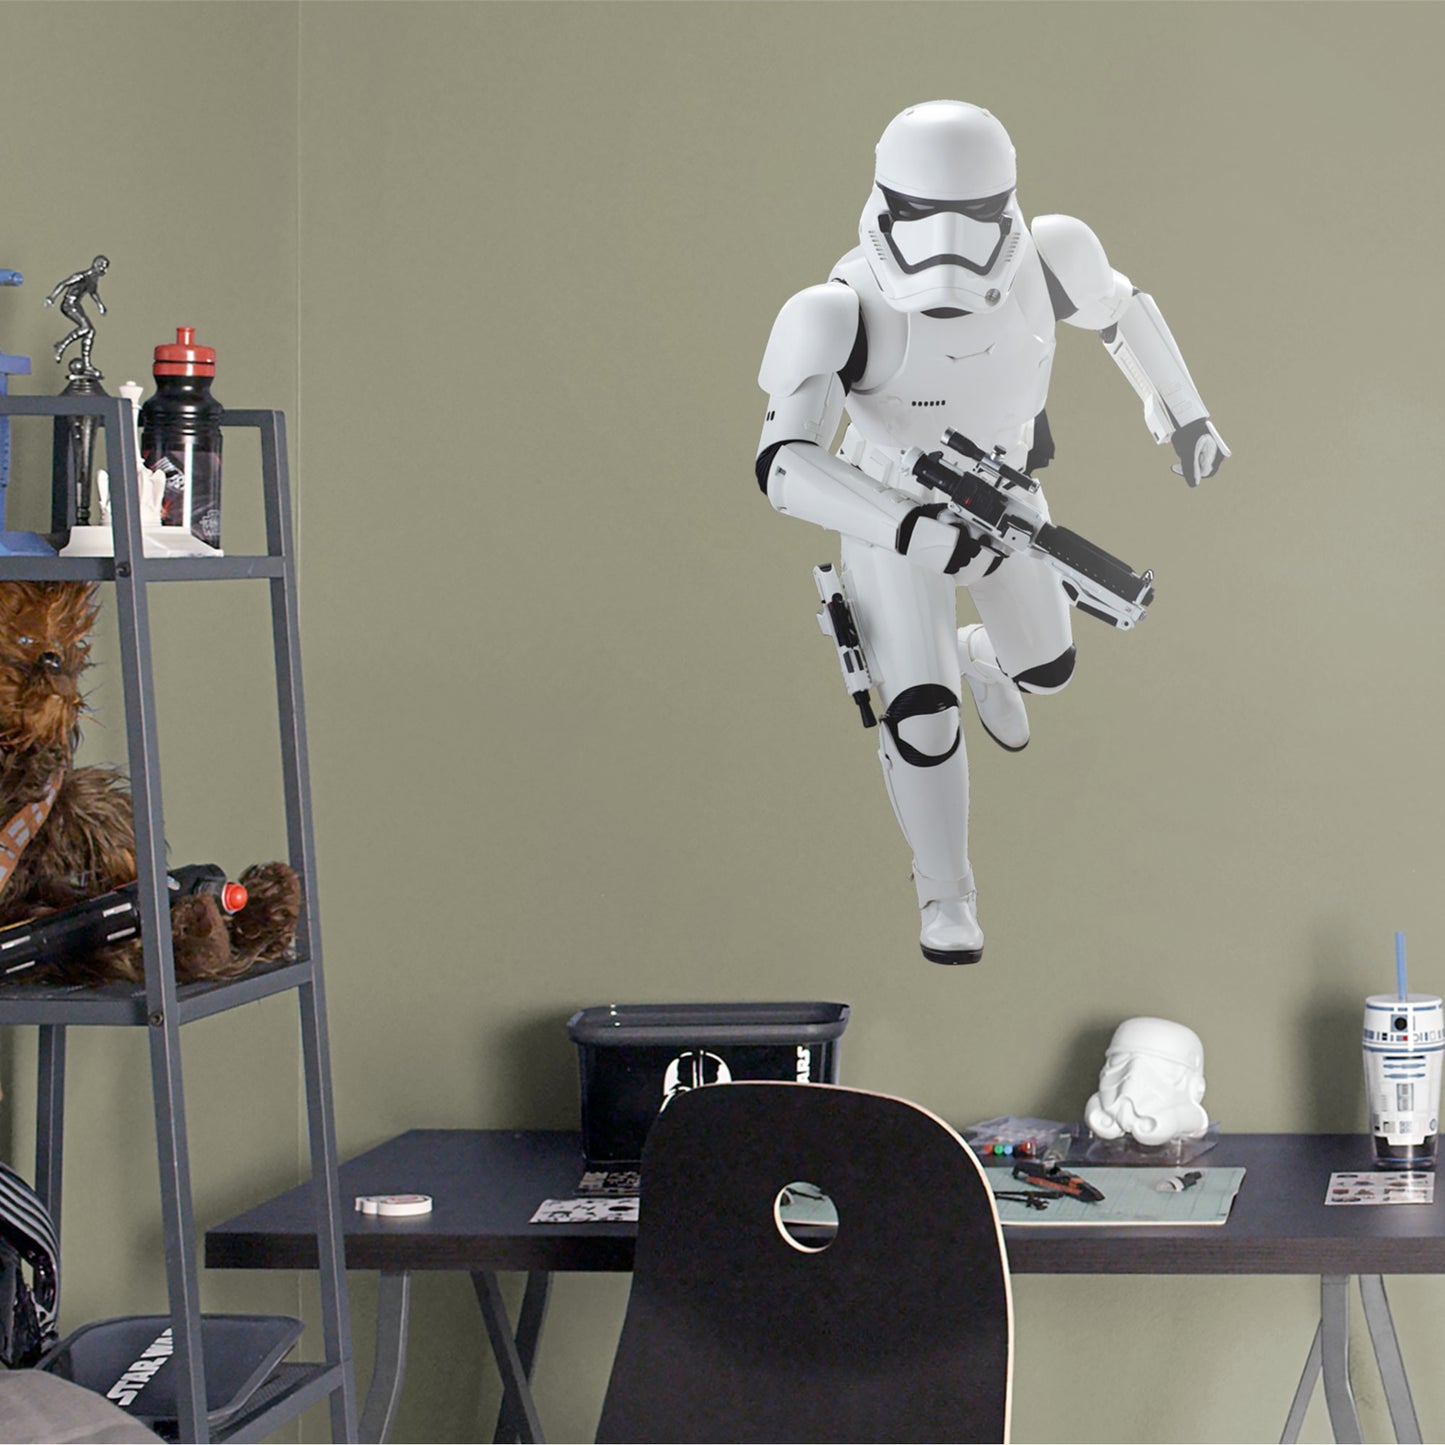 Stormtrooper - Star Wars: The Force Awakens - Officially Licensed Removable Wall Decal